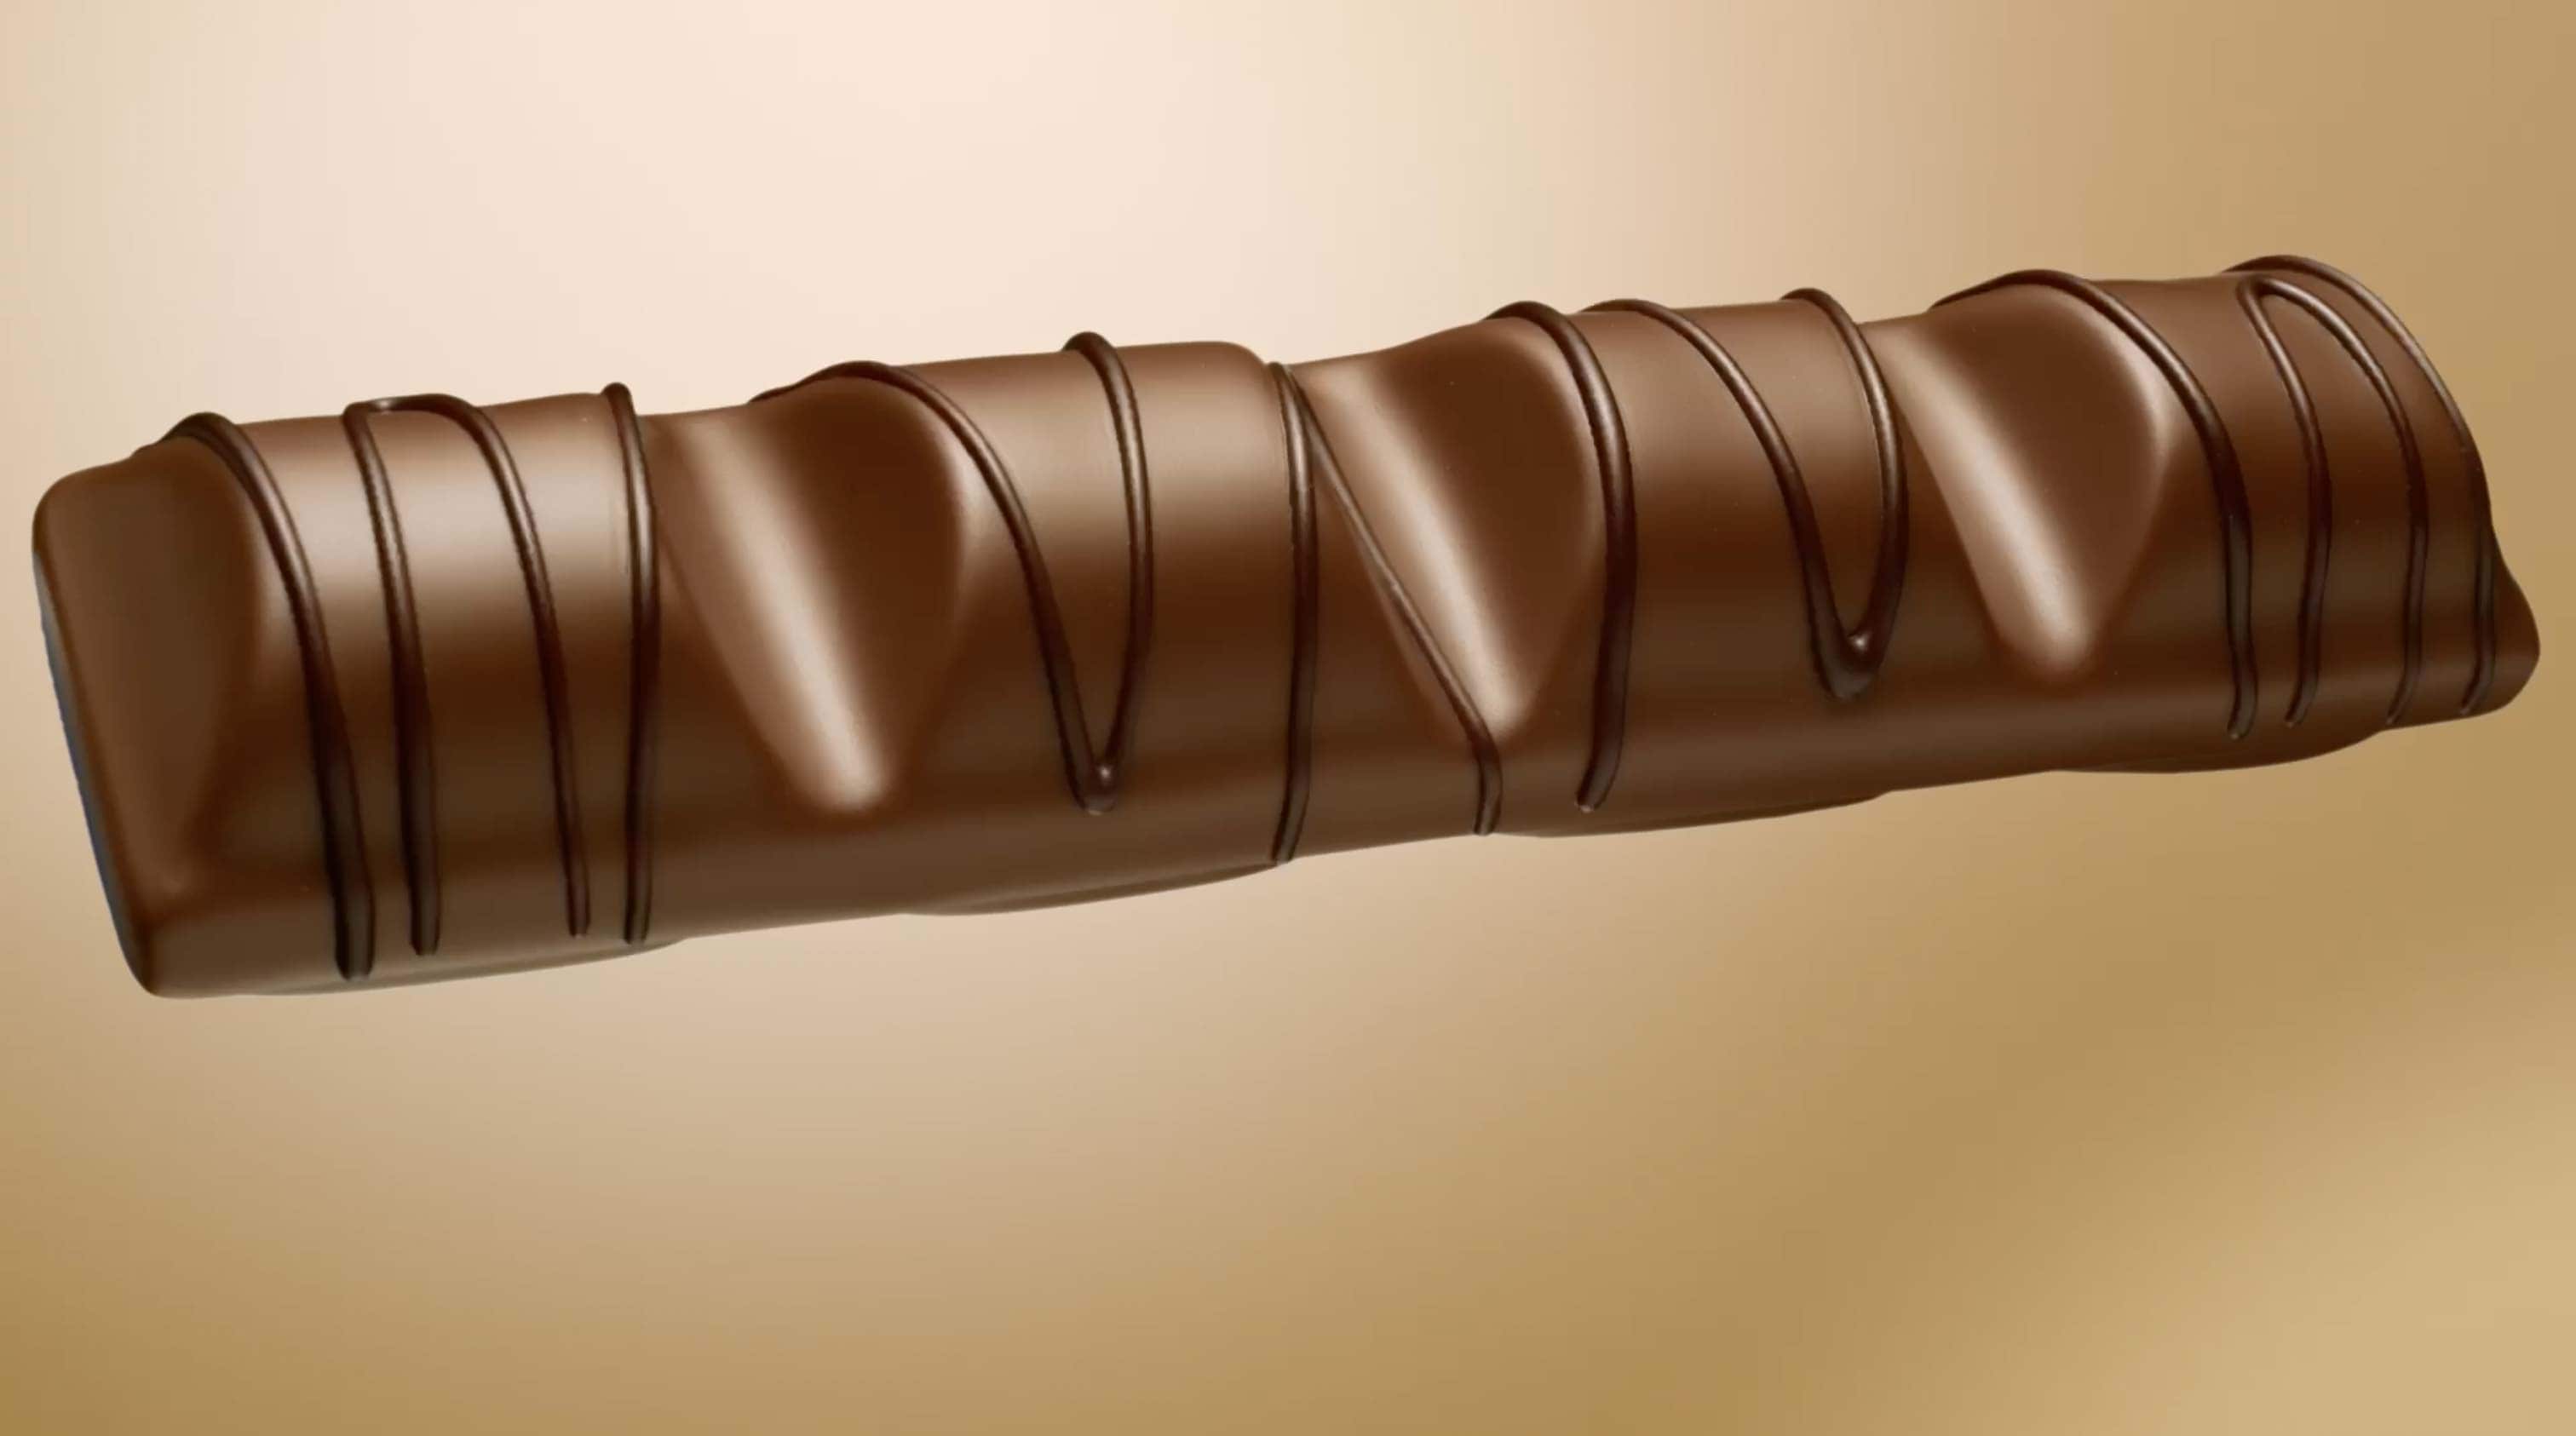 Why You'll Be Seeing A Lot More Of Kinder Bueno Chocolates